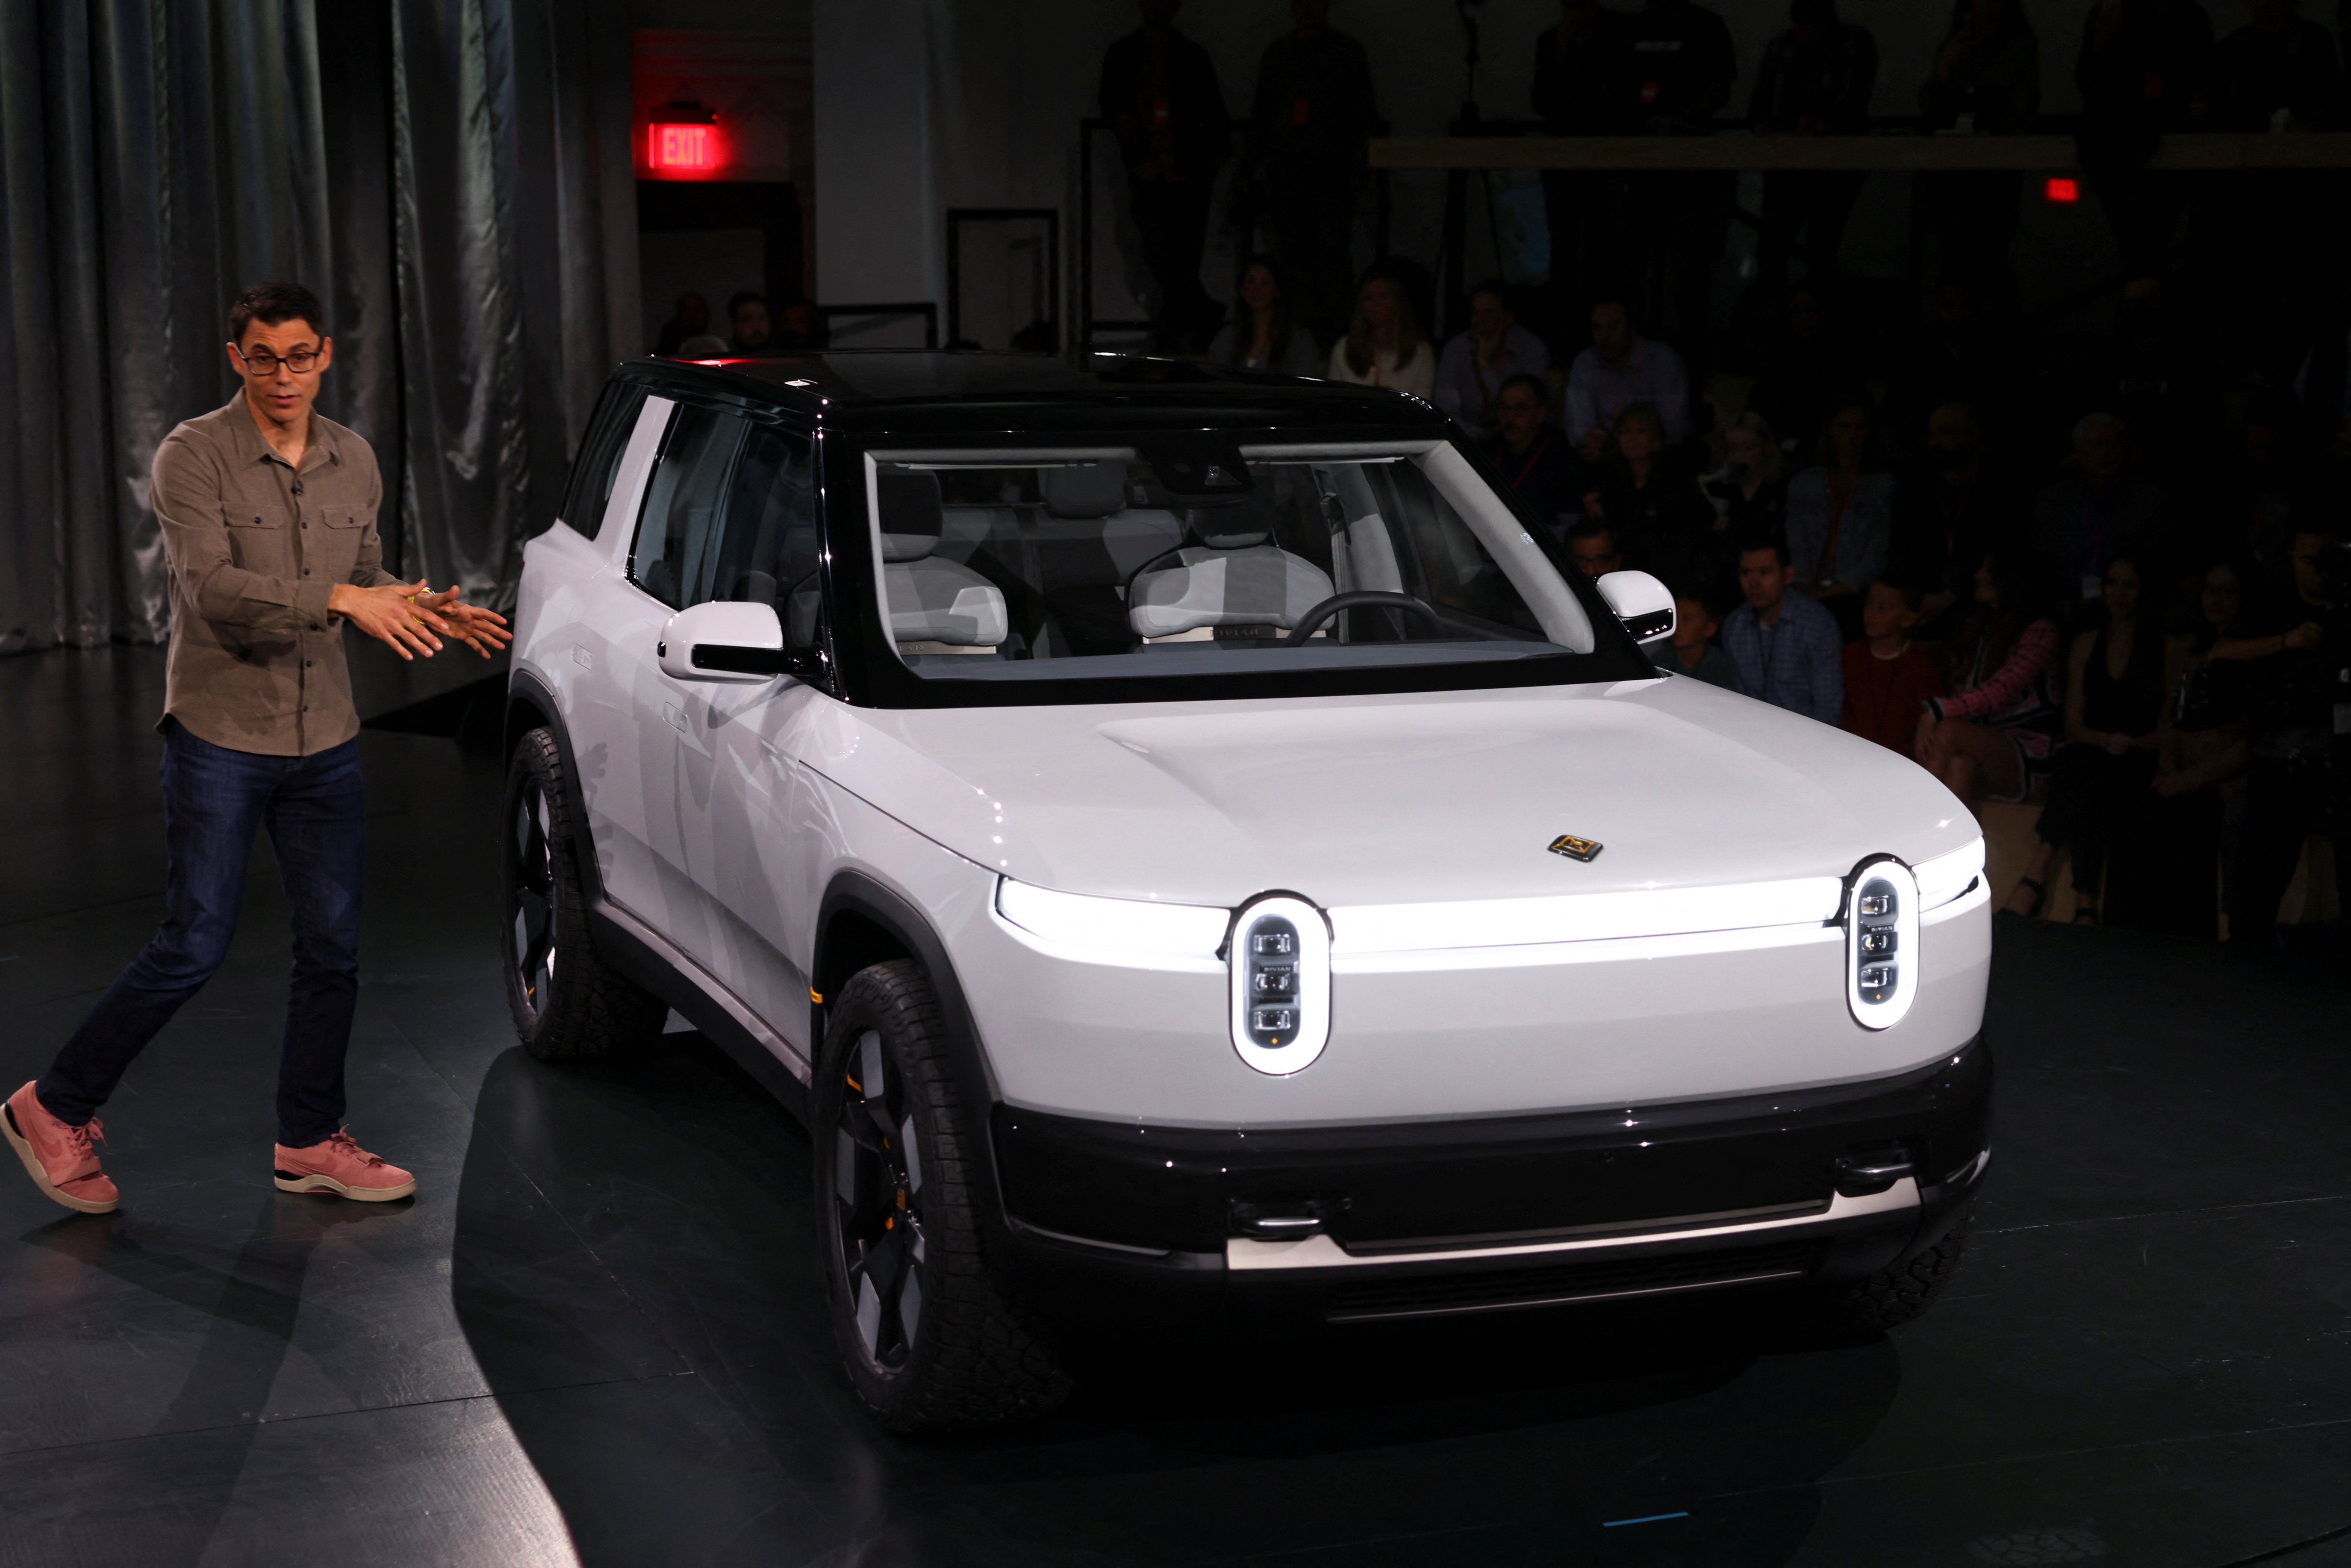 Electric truck maker Rivian unveils a smaller R2 SUV during an event in Laguna Beach